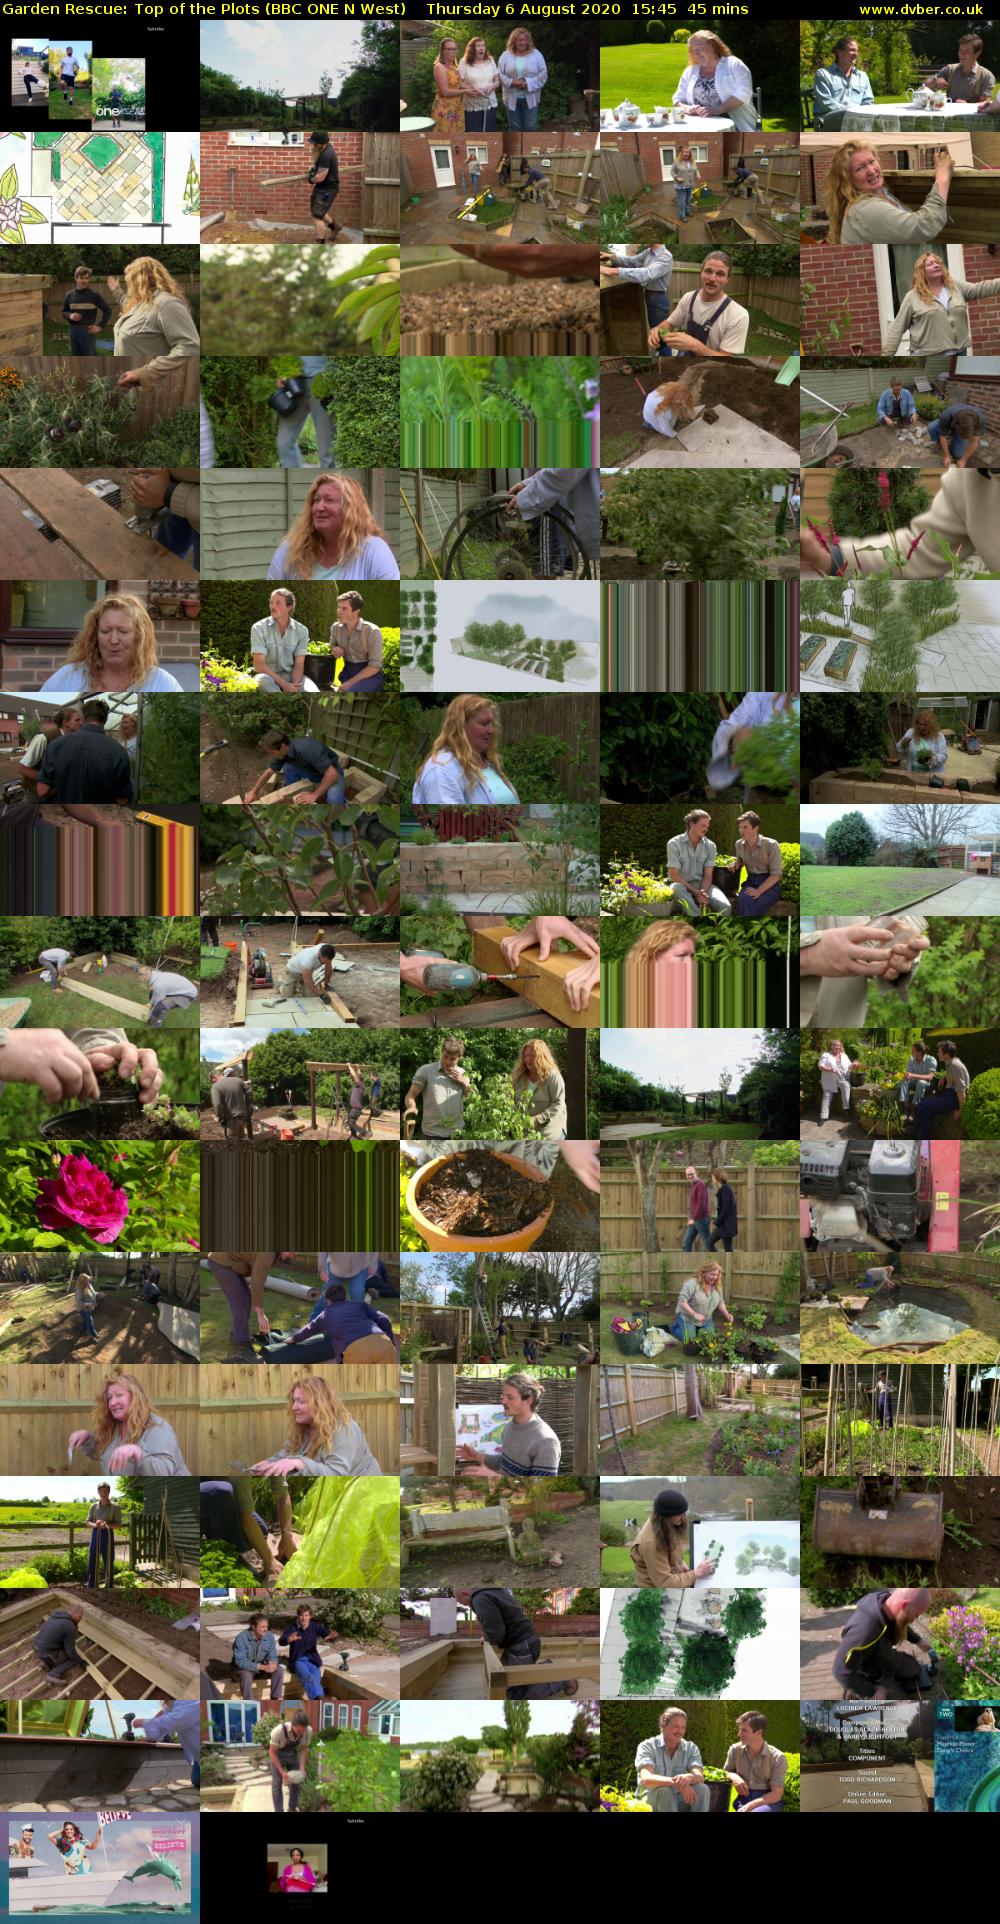 Garden Rescue: Top of the Plots (BBC ONE N West) Thursday 6 August 2020 15:45 - 16:30